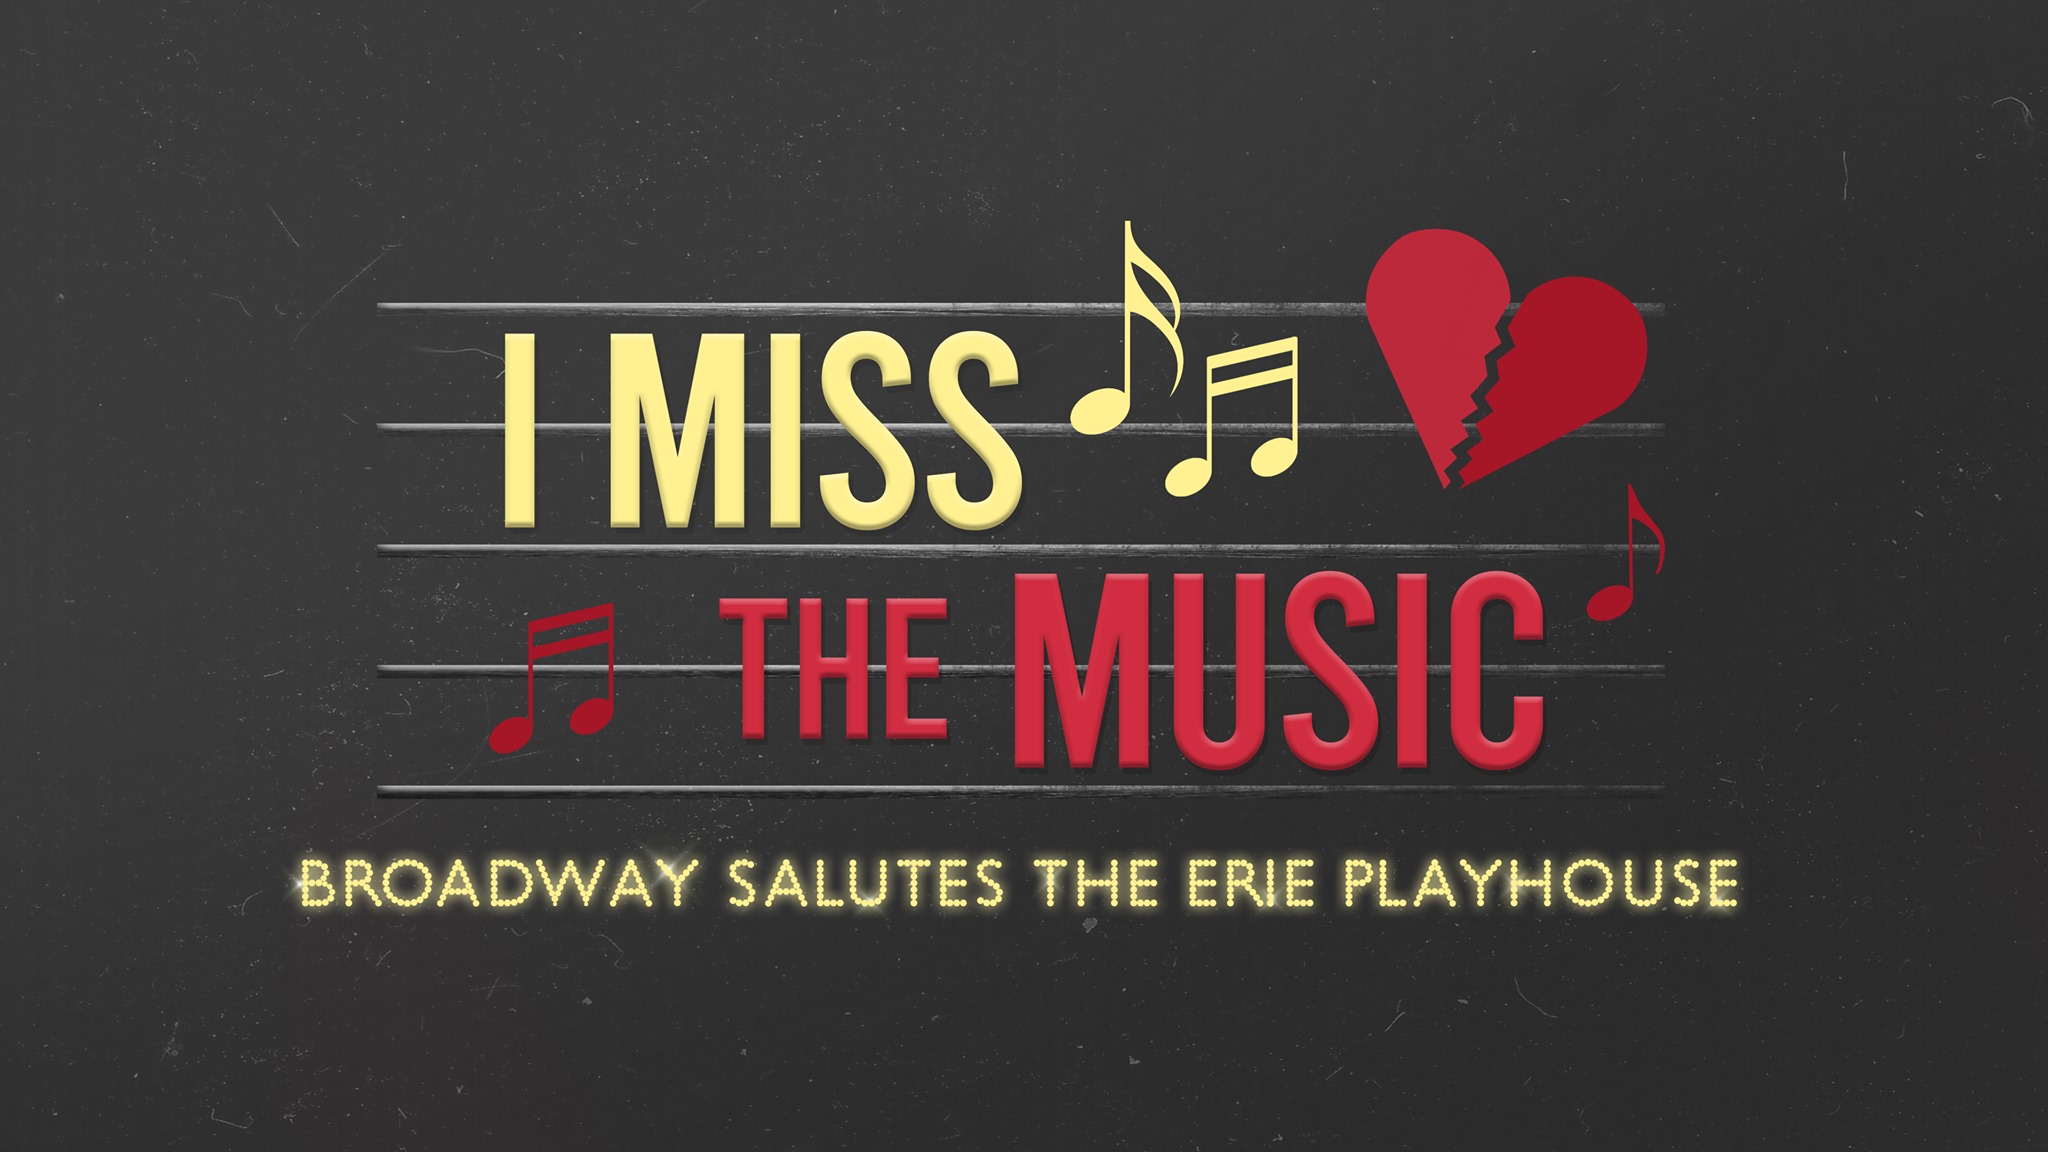 I Miss the Music - Broadway Salutes the Erie Playhouse